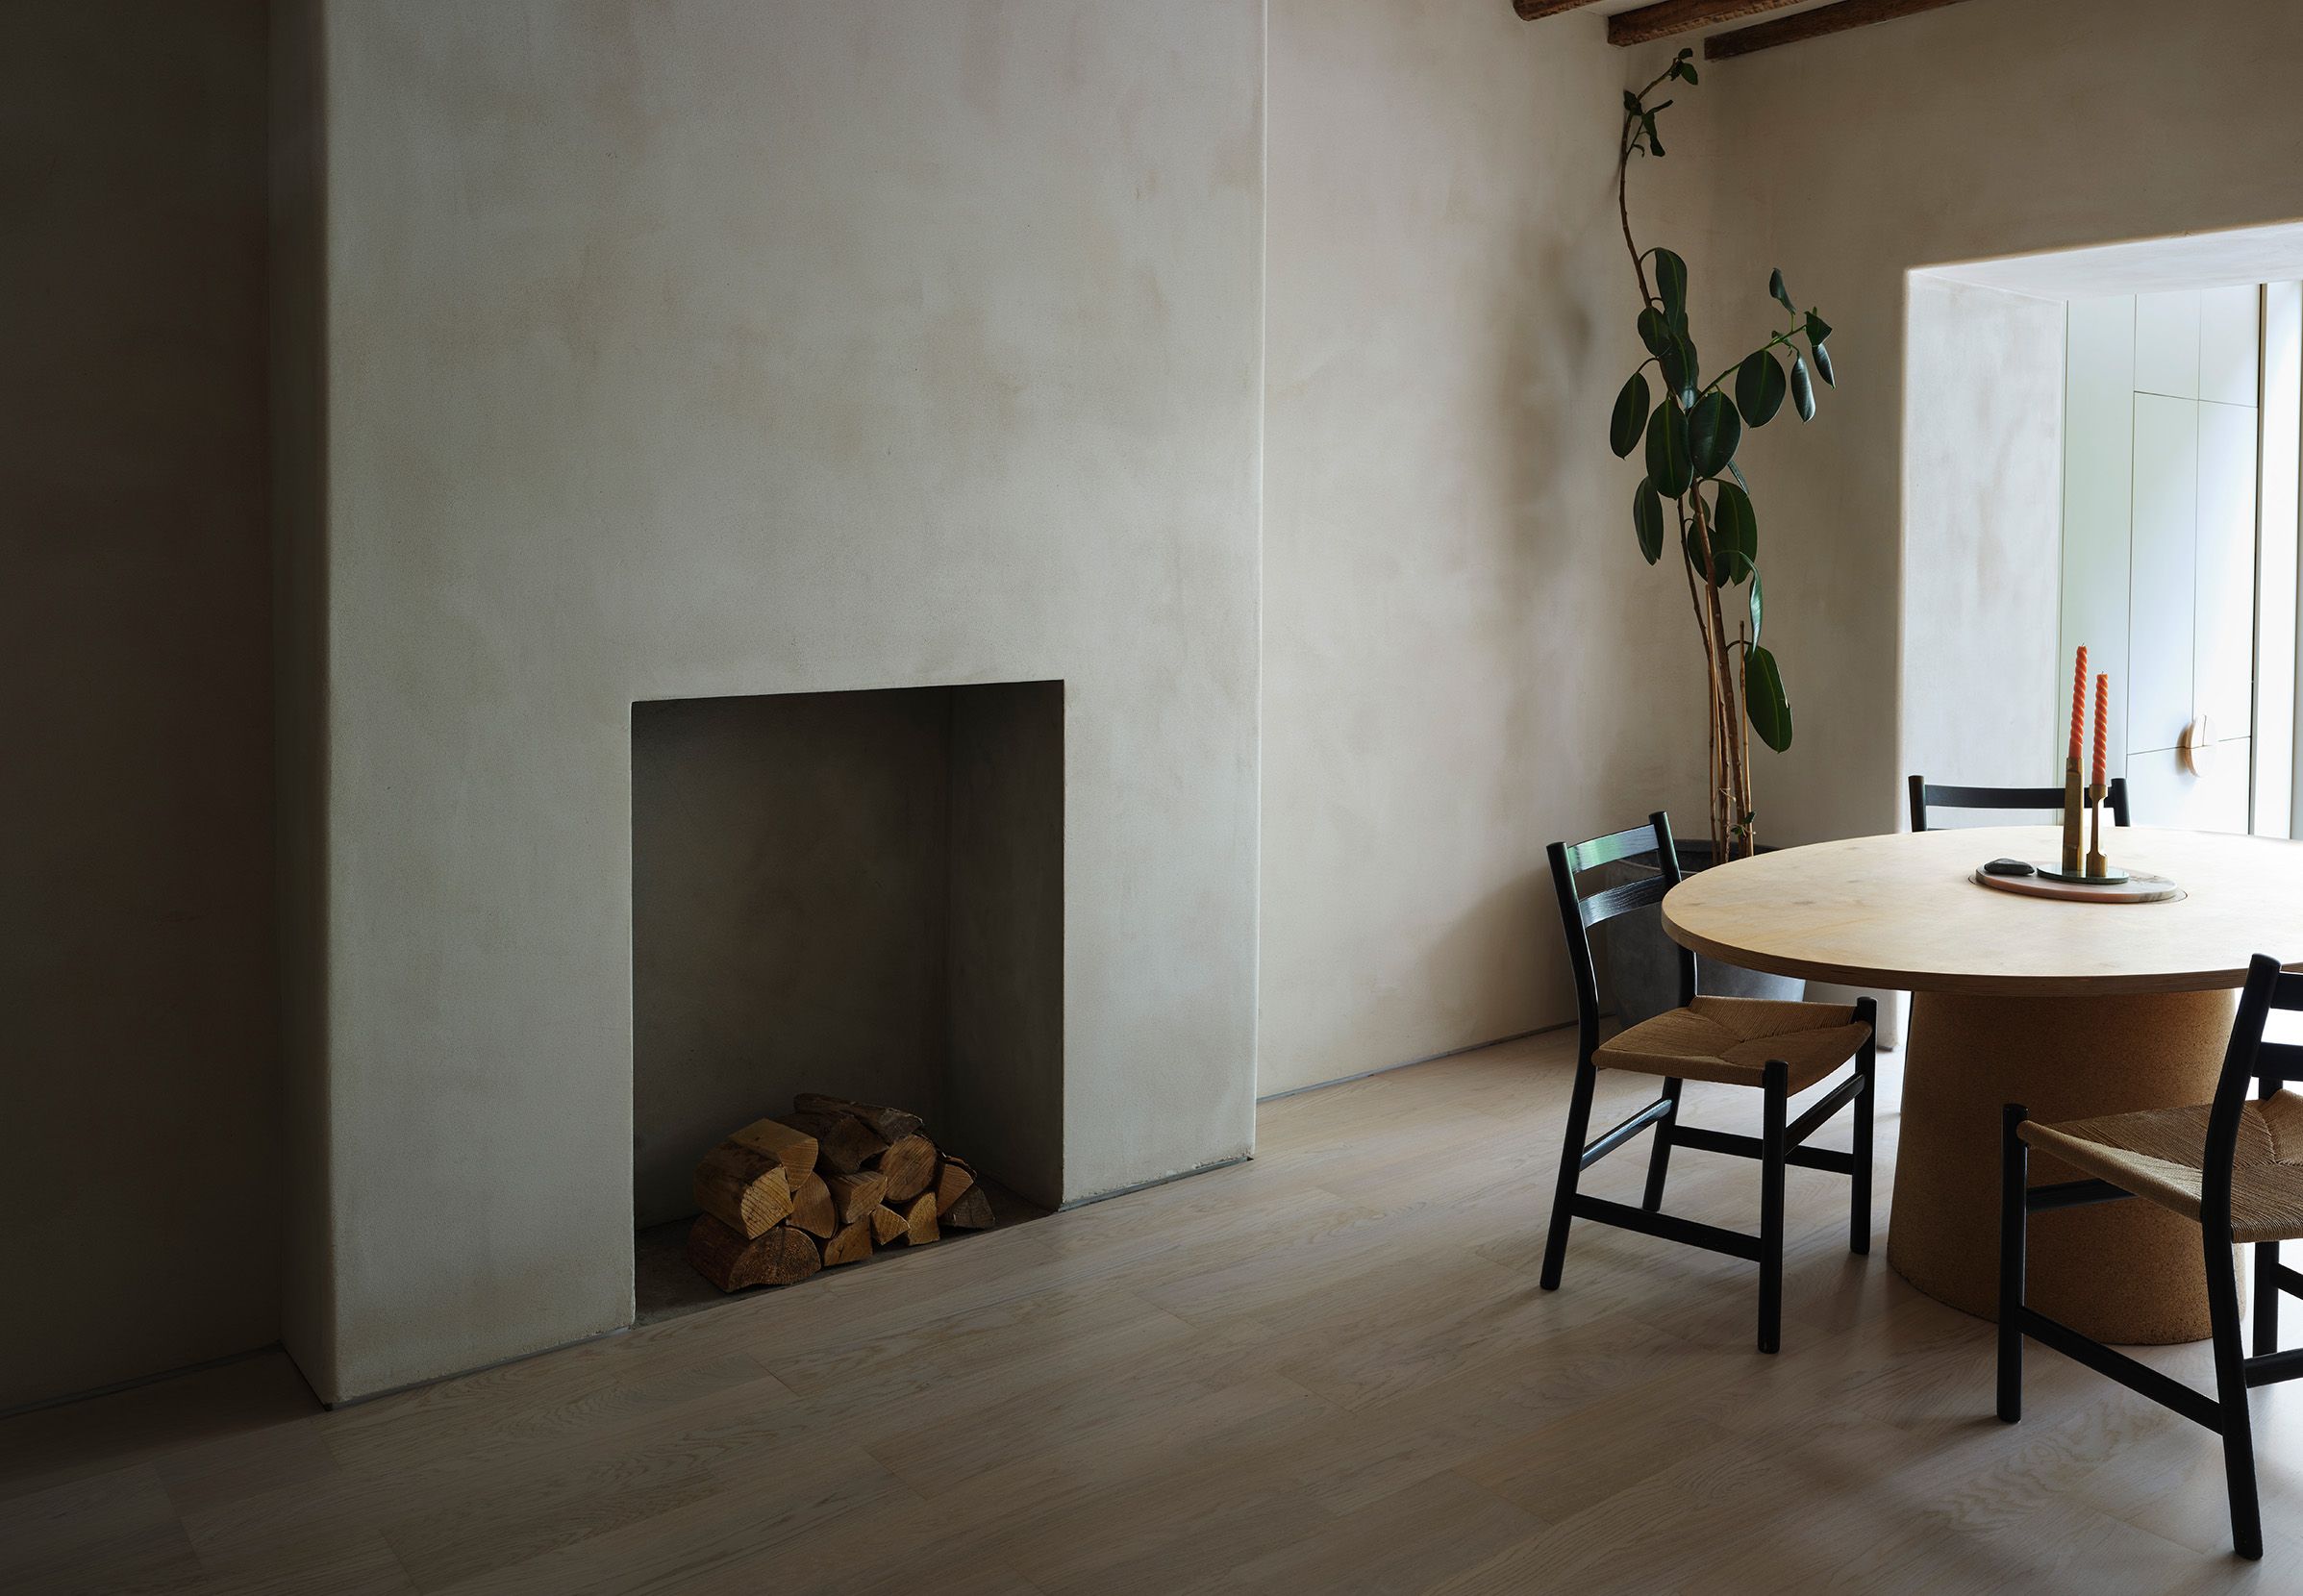 Wood flooring room with plastered wall and modern fire place. Wooden round table with chairs around it. Candles on the table and a leafy plant in the back corner of the room.